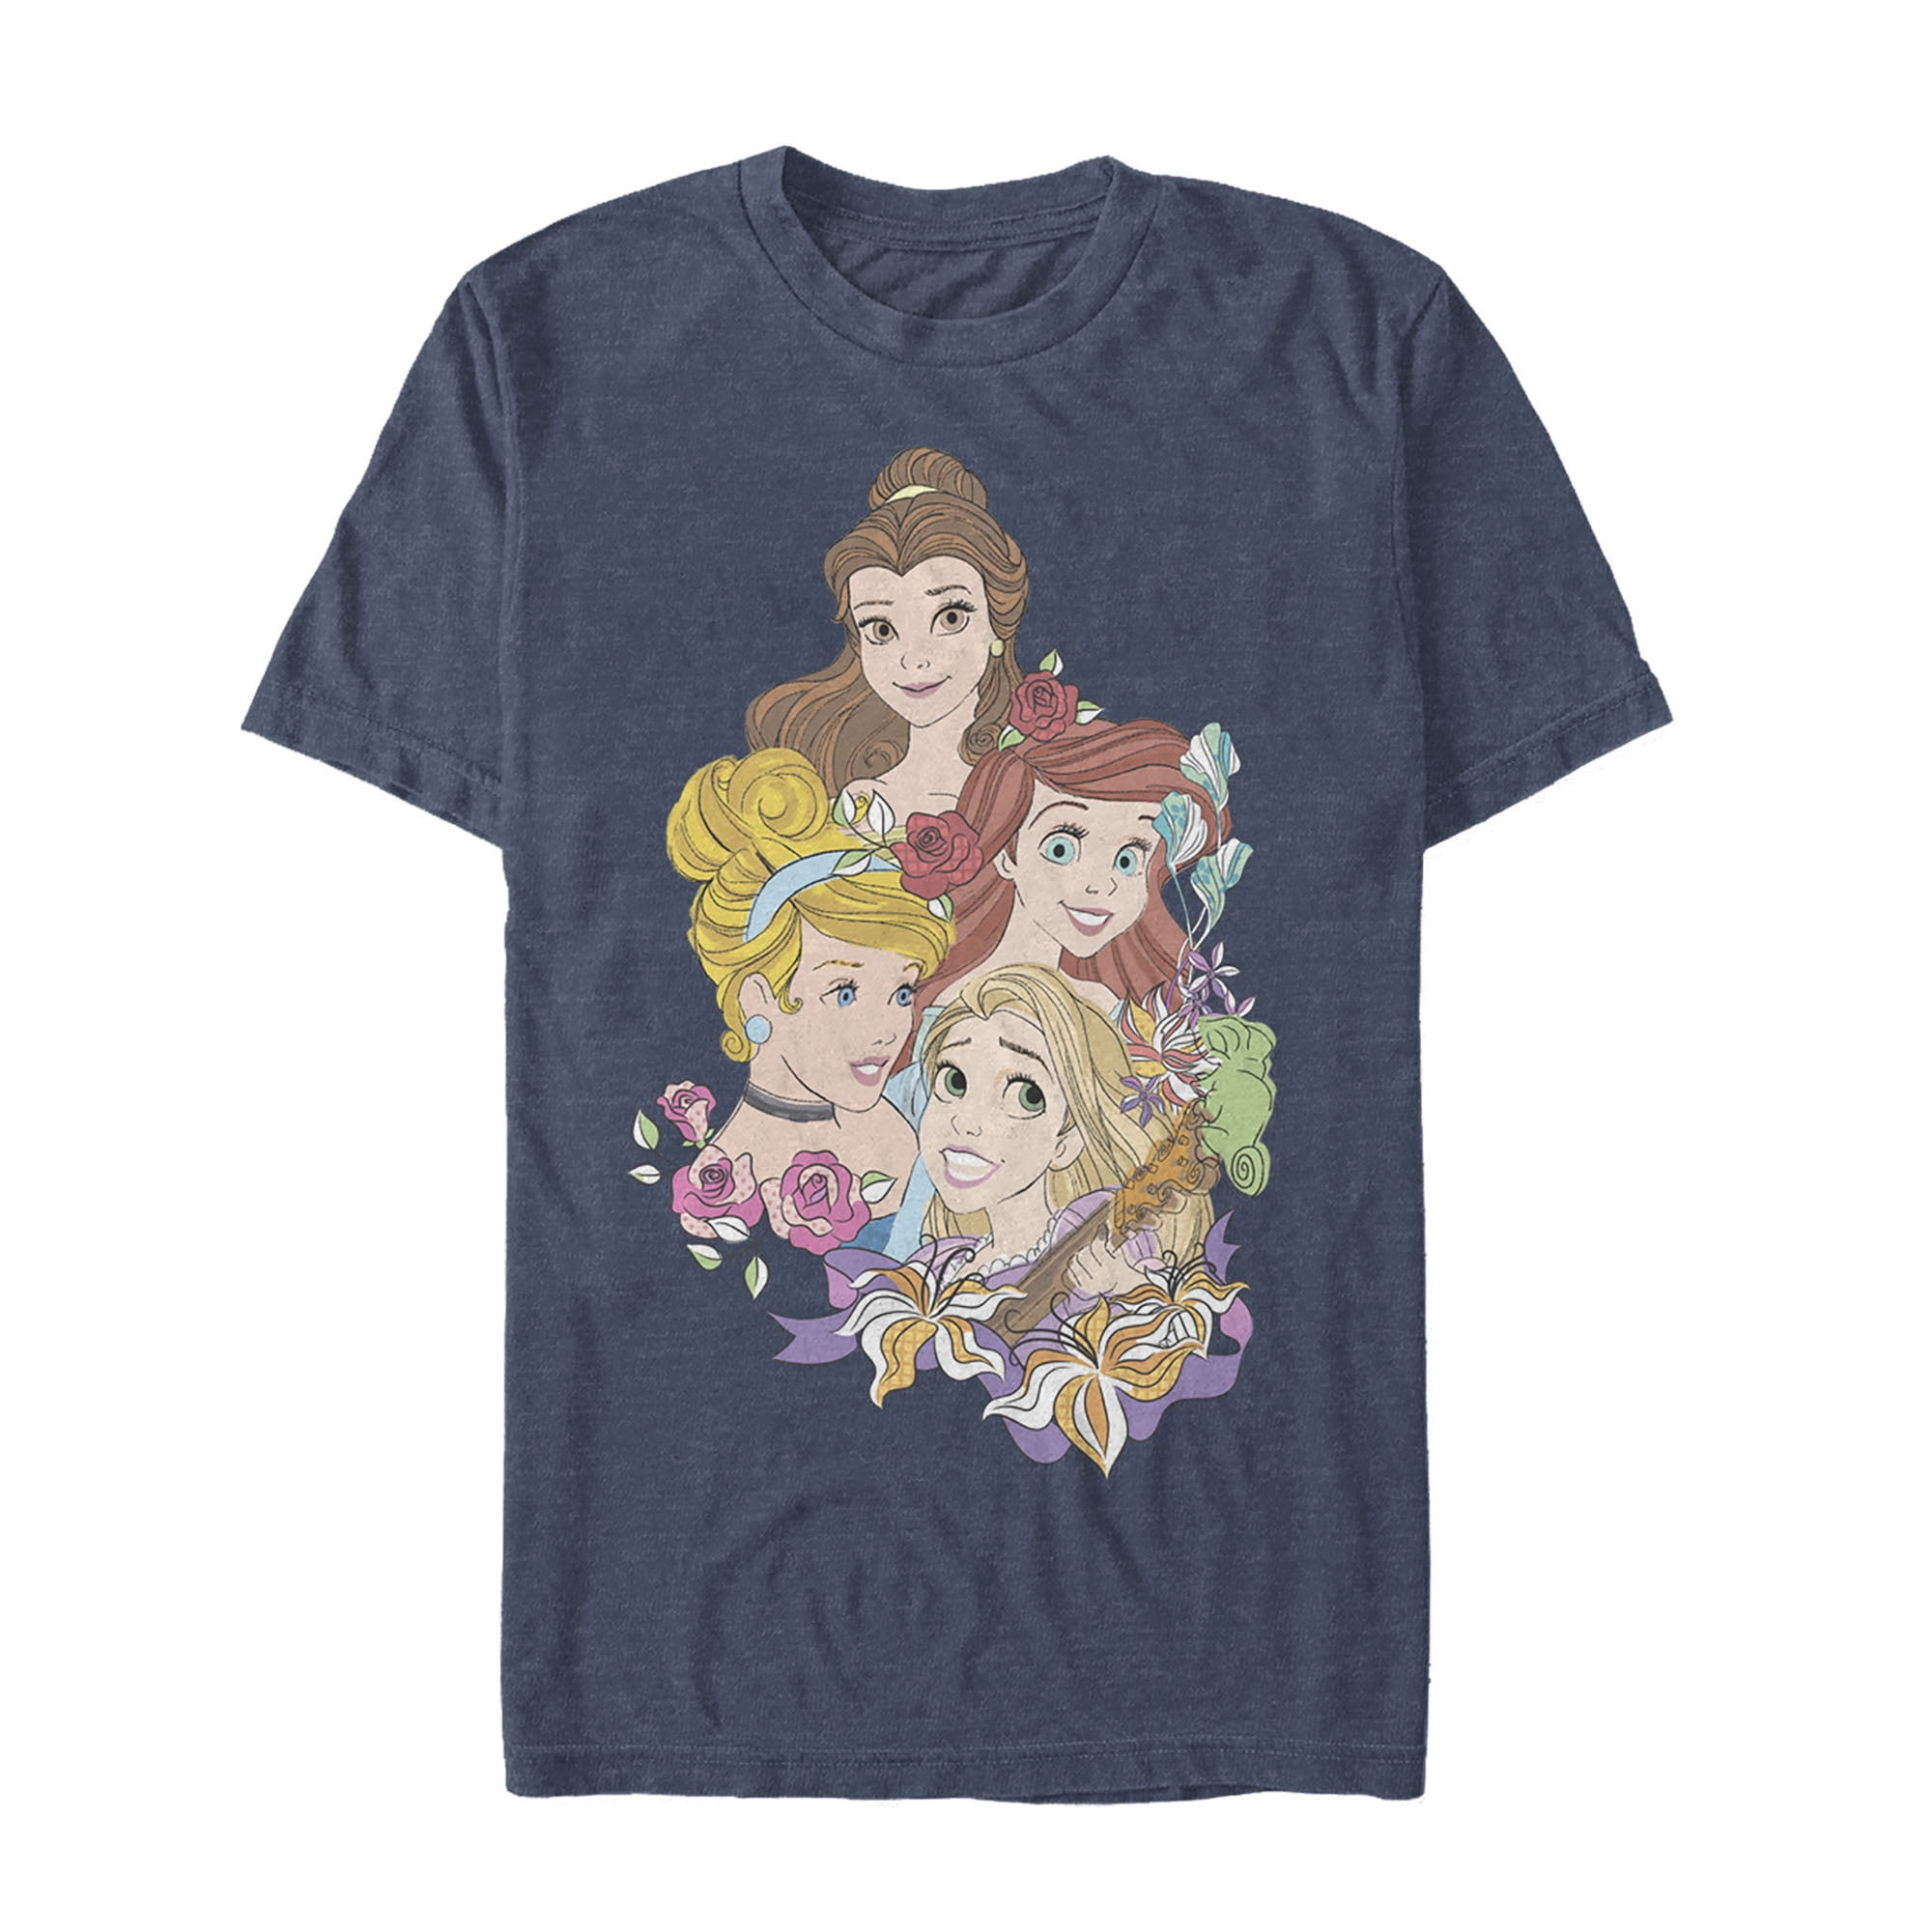 Disney Princess 'Girls Were Born To Rule' Graphic Tee Size Small 5-6 